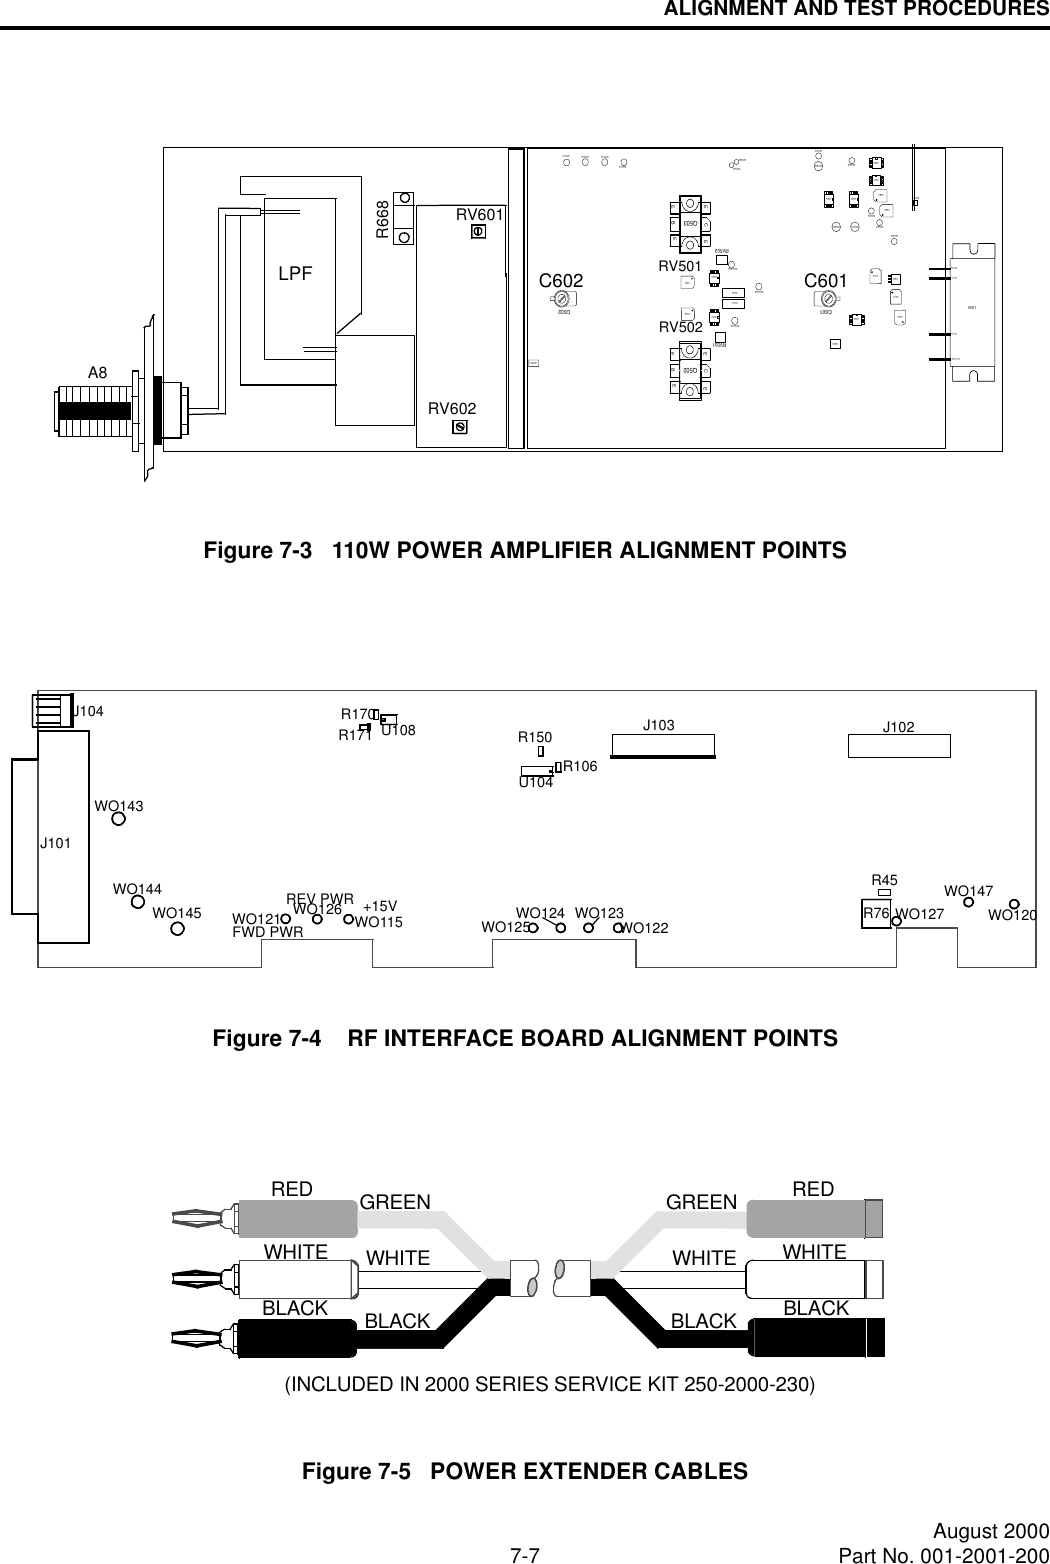 ALIGNMENT AND TEST PROCEDURES7-7 August 2000Part No. 001-2001-200Figure 7-3   110W POWER AMPLIFIER ALIGNMENT POINTSFigure 7-4    RF INTERFACE BOARD ALIGNMENT POINTSFigure 7-5   POWER EXTENDER CABLESWO517WO516WO515WO514WO524WO523WO513C602C601U5031458Q502CEEEEBRV501+C548R516WO523AWO502AU5091458R518+C545U501RF OUTVcc 2Vcc 1RF IN+C519+C519+C584+C580U5061458U5051458U5081458U5071458WO520WO504WO509WO501 WO502WO503WO512WO505WO511U502Q503CEEEEBRV502WO524AU5041458R526+C557RV601RV602A8R668C602 C601LPF RV501RV502J101J104U108R170R171U104R150R106R76J103 J102WO122WO123WO124WO125WO115WO126WO121 WO127 WO120WO147WO143WO144WO145R45FWD PWRREV PWR +15VREDWHITEBLACKWHITEBLACKGREENWHITEBLACKGREEN REDWHITEBLACK(INCLUDED IN 2000 SERIES SERVICE KIT 250-2000-230)